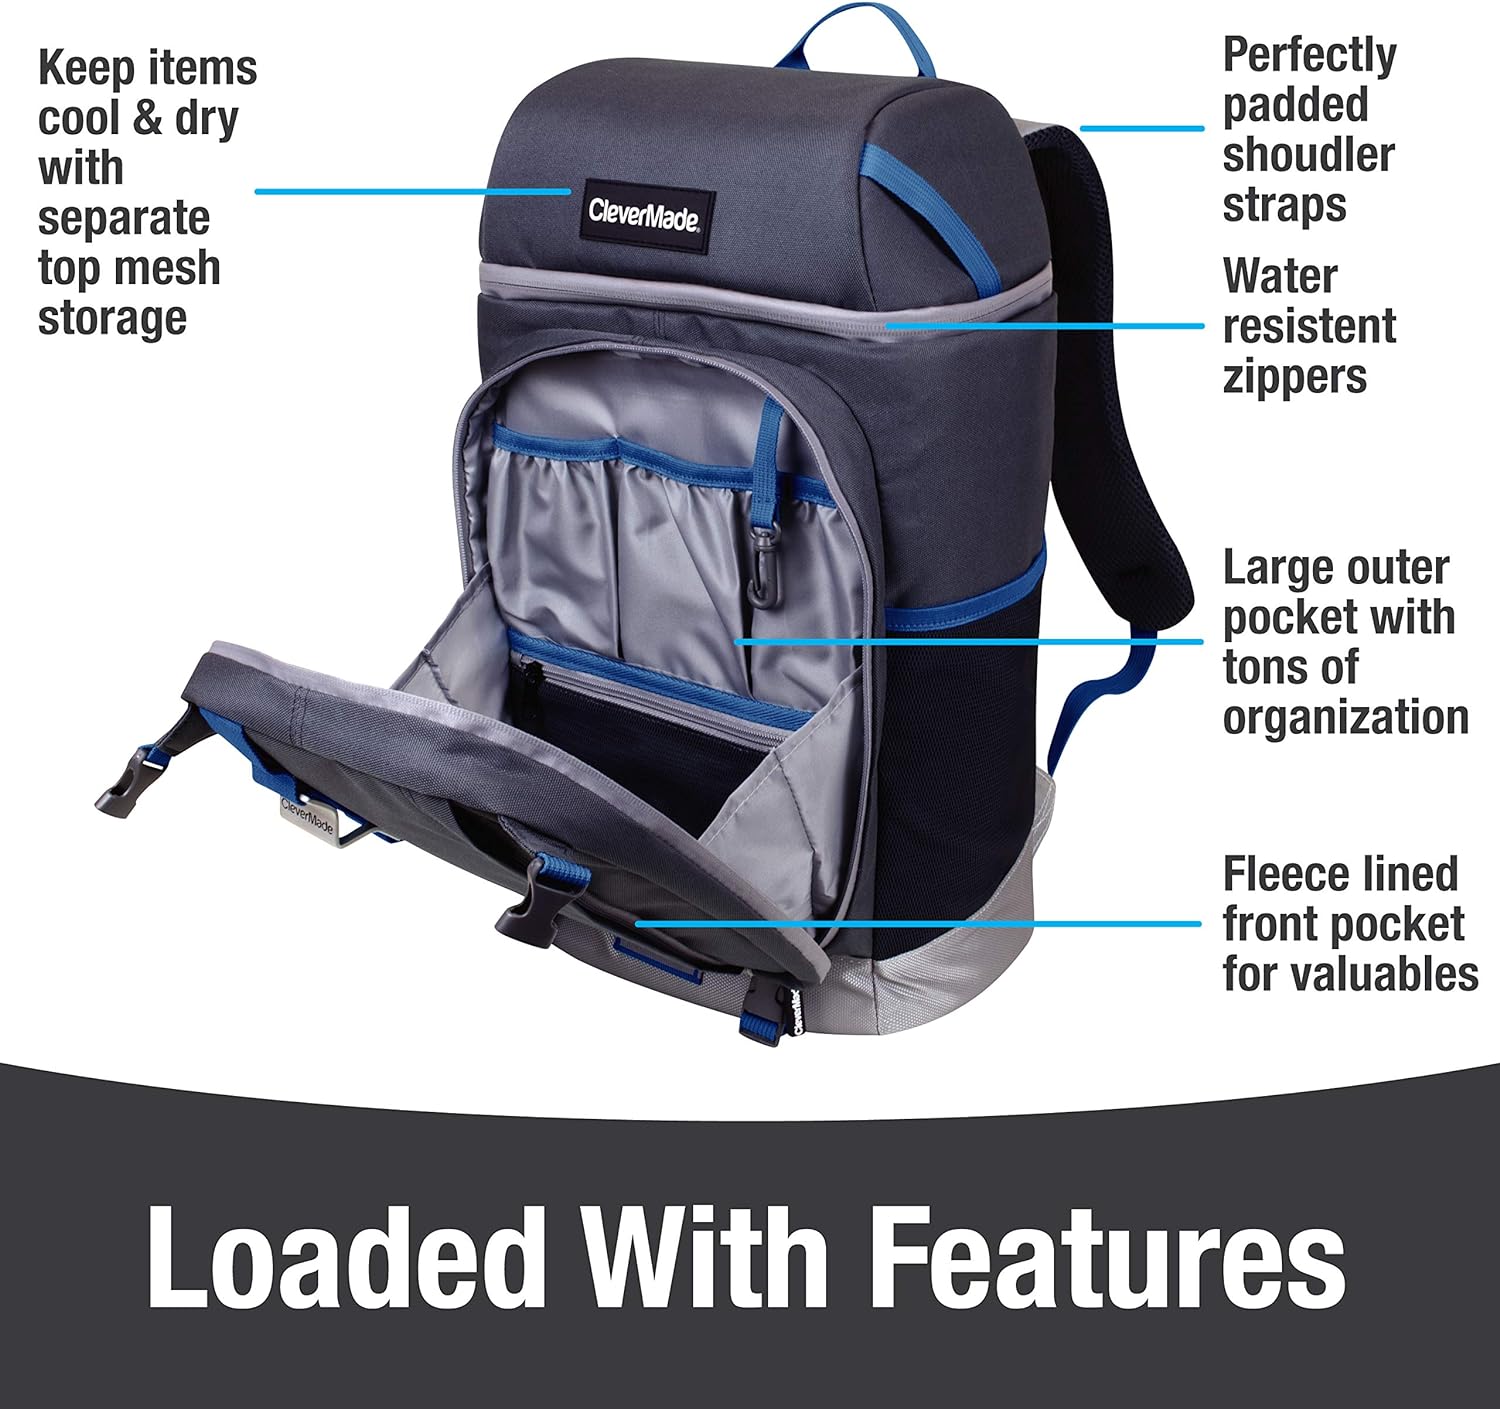 CleverMade Cardiff Backpack Cooler Bag - Insulated 24 Can Soft Leakproof Cooler with Bottle Opener, Dry Storage Compartments and Mesh Side